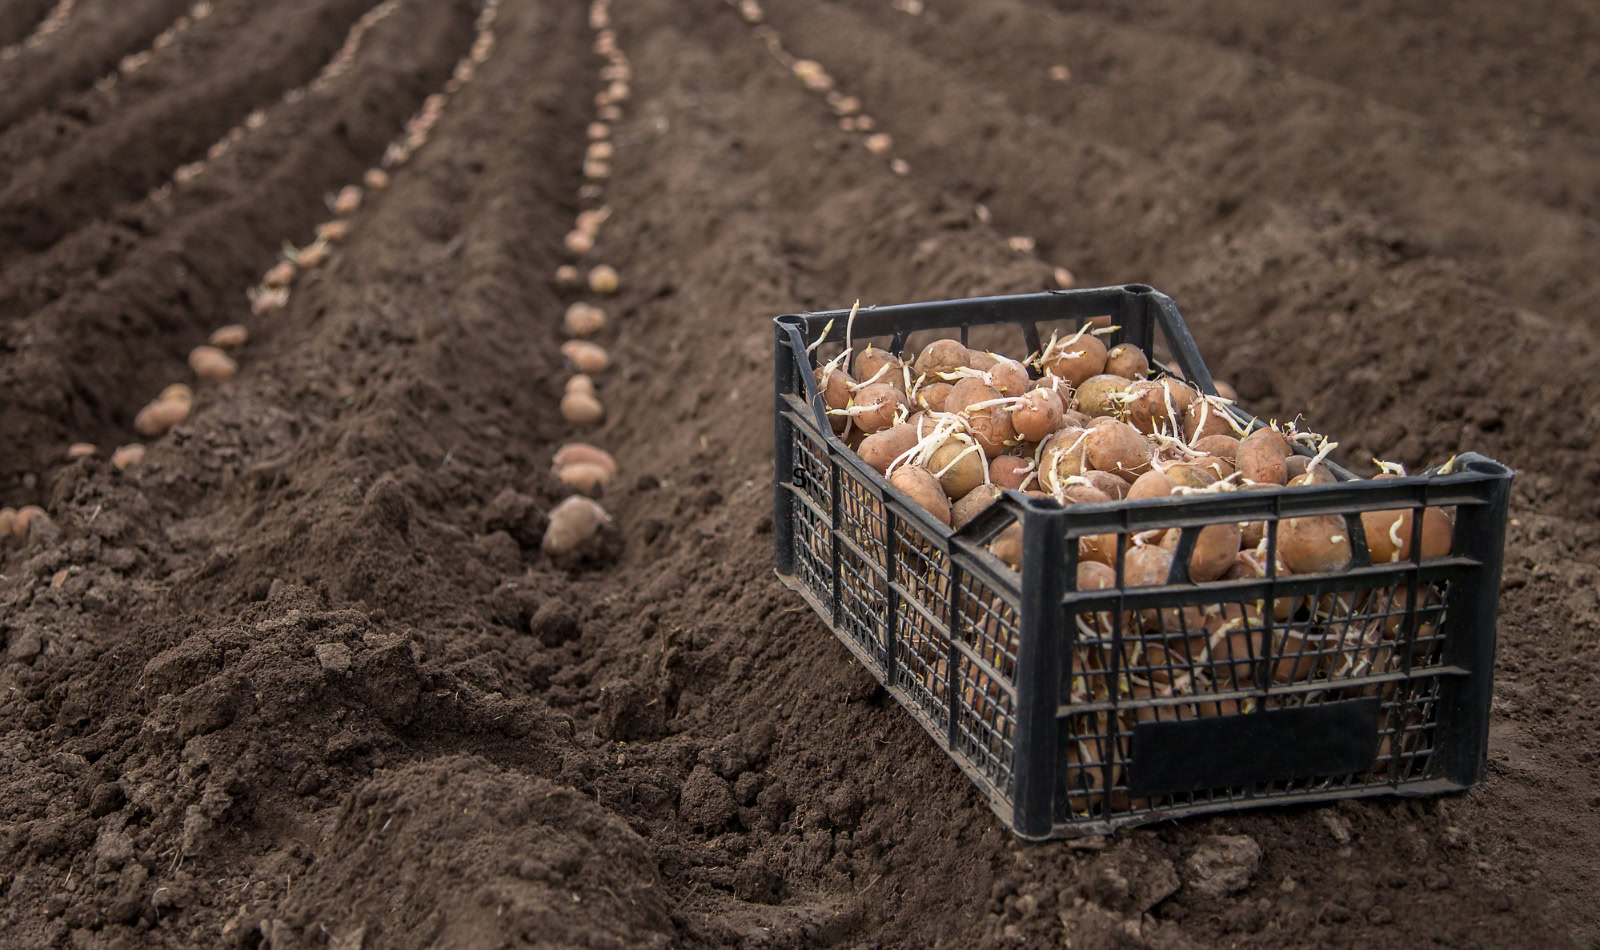 bin of potatoes in plowed field waiting to be planted